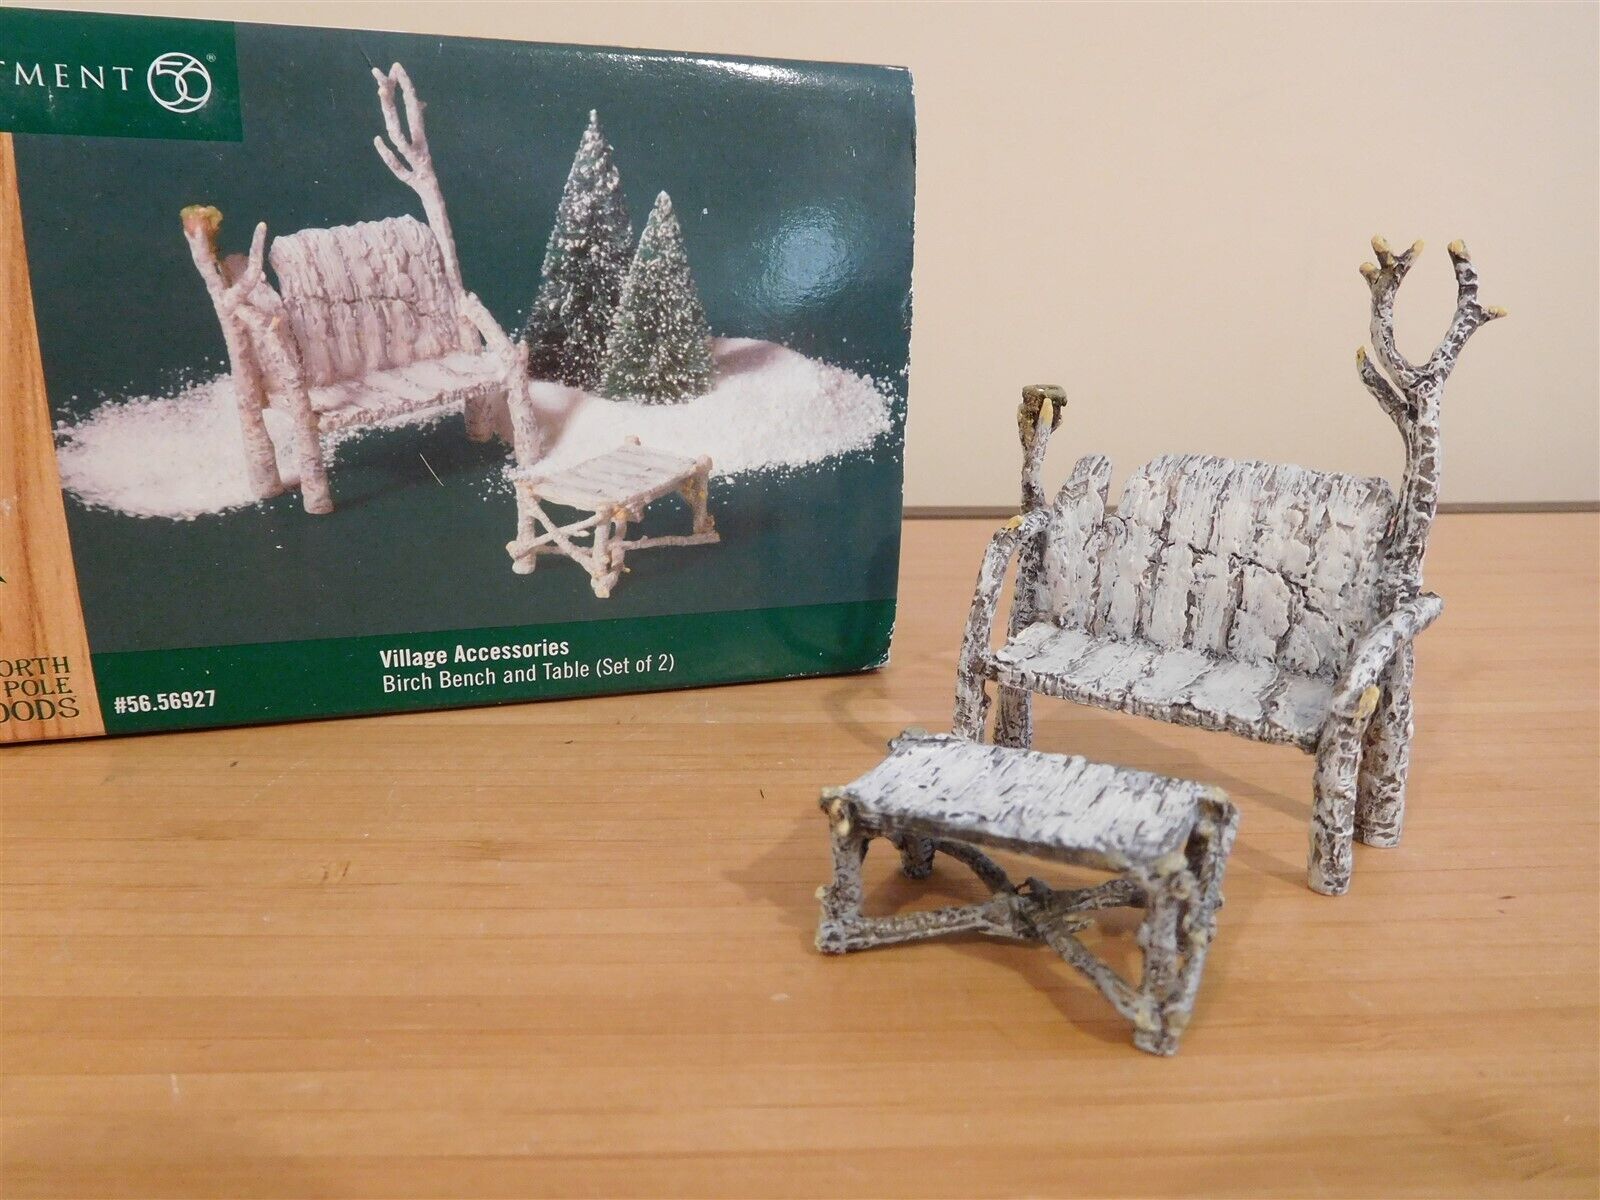 Dept 56 North Pole Woods Accessory - Birch Bench and Table - NIB - 